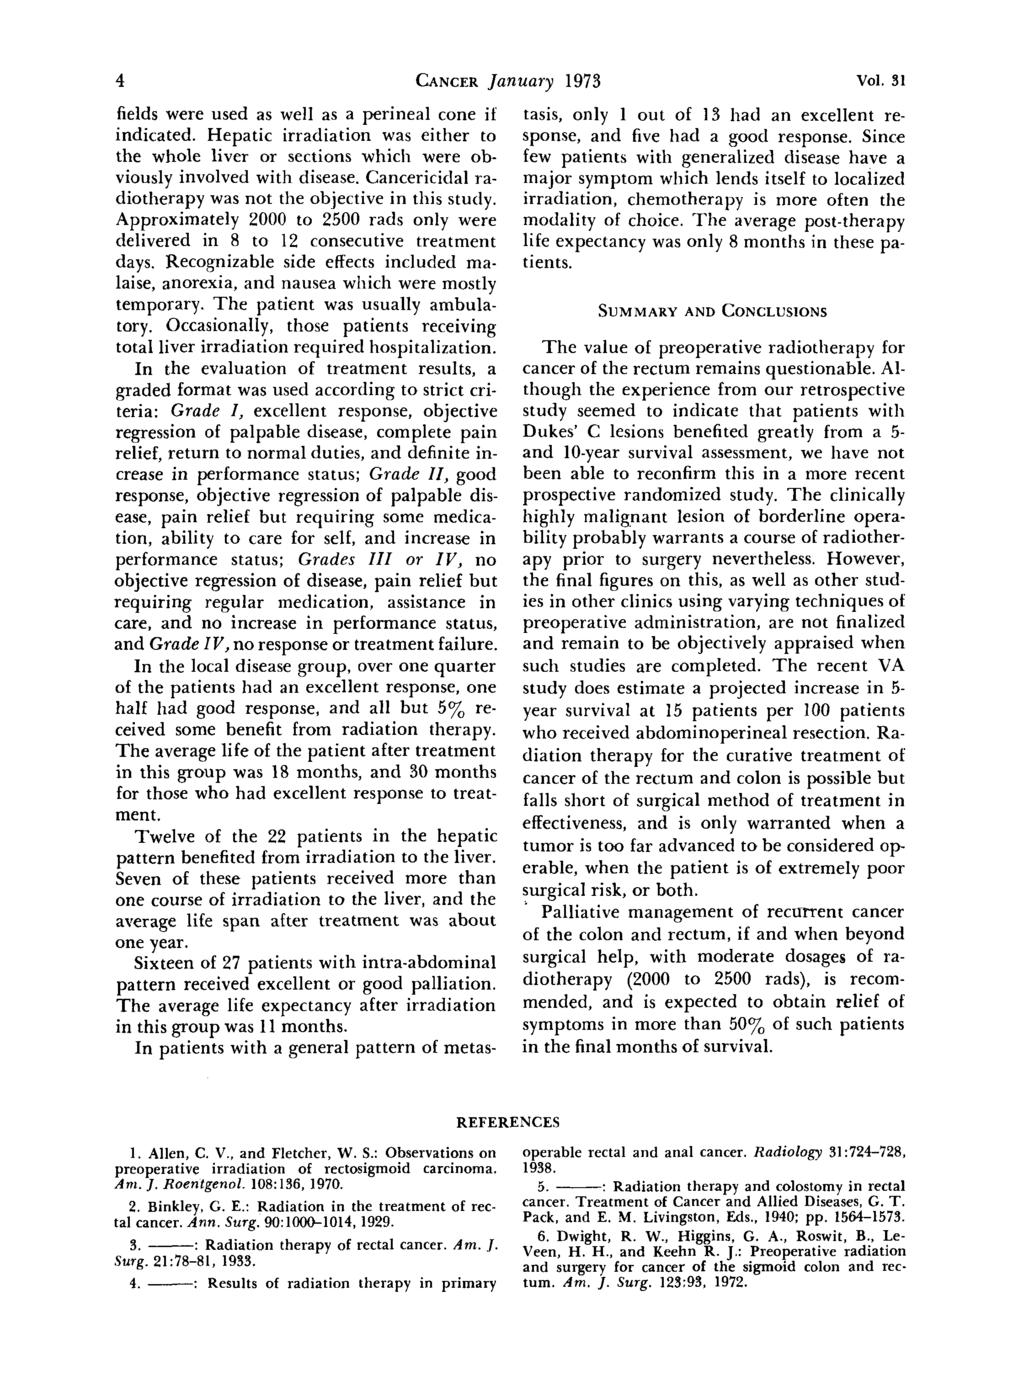 4 CANCER January 1973 Vol. 31 fields were used as well as a perineal cone if indicated. Hepatic irradiation was either to the whole liver or sections which were obviously involved with disease.